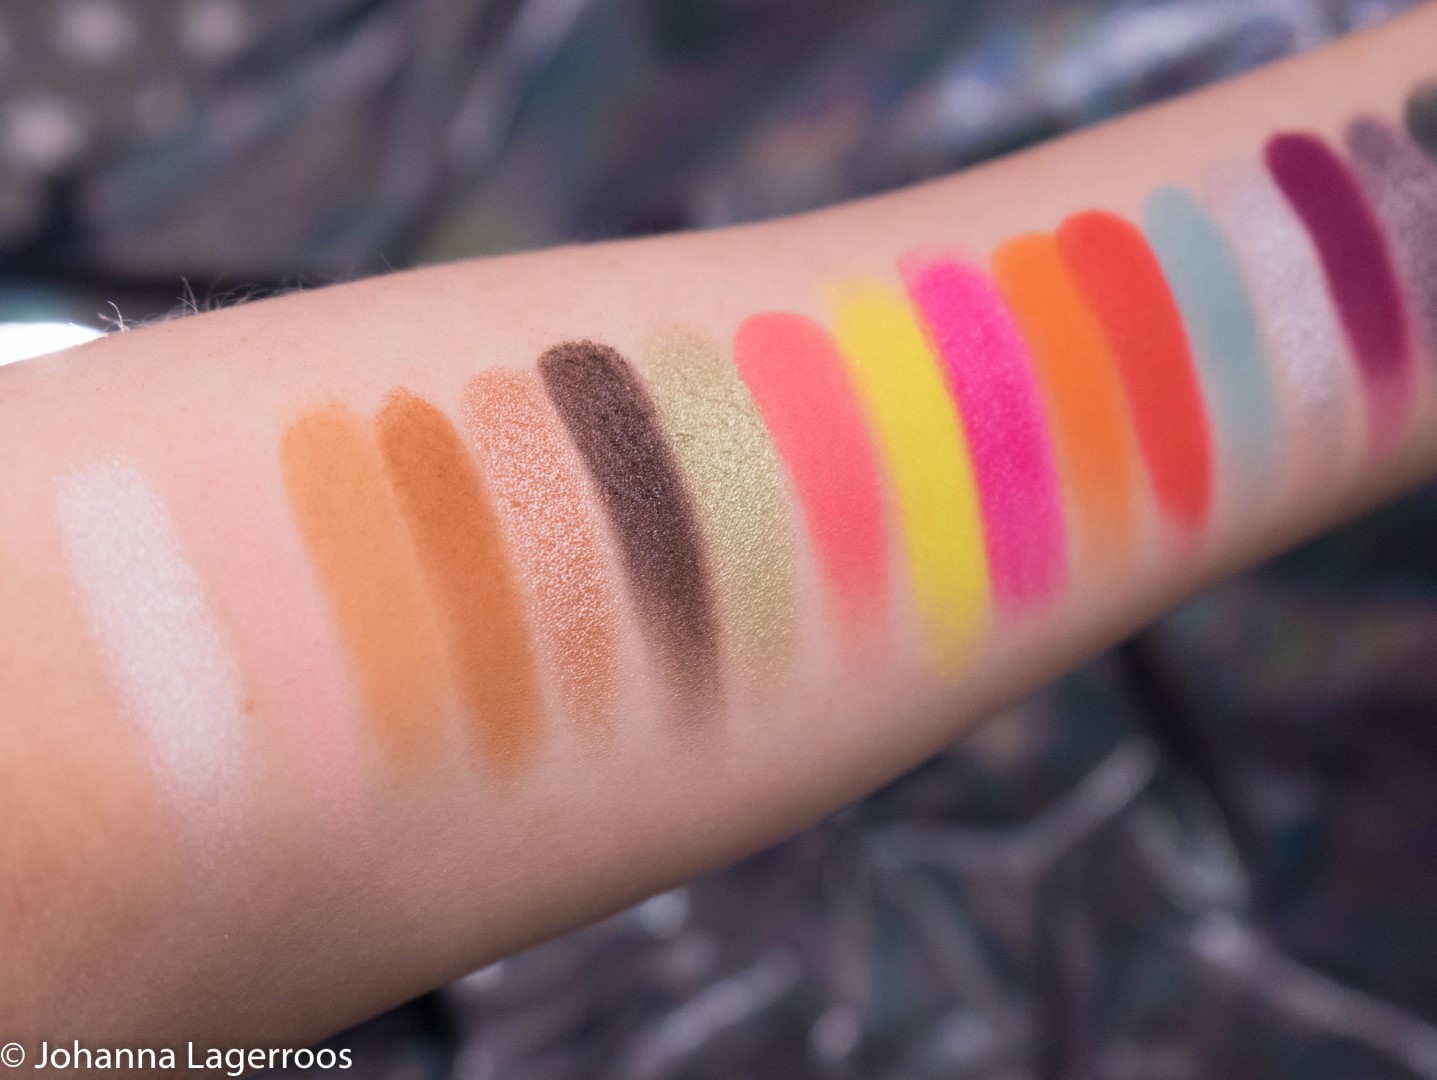 Conspiracy swatches